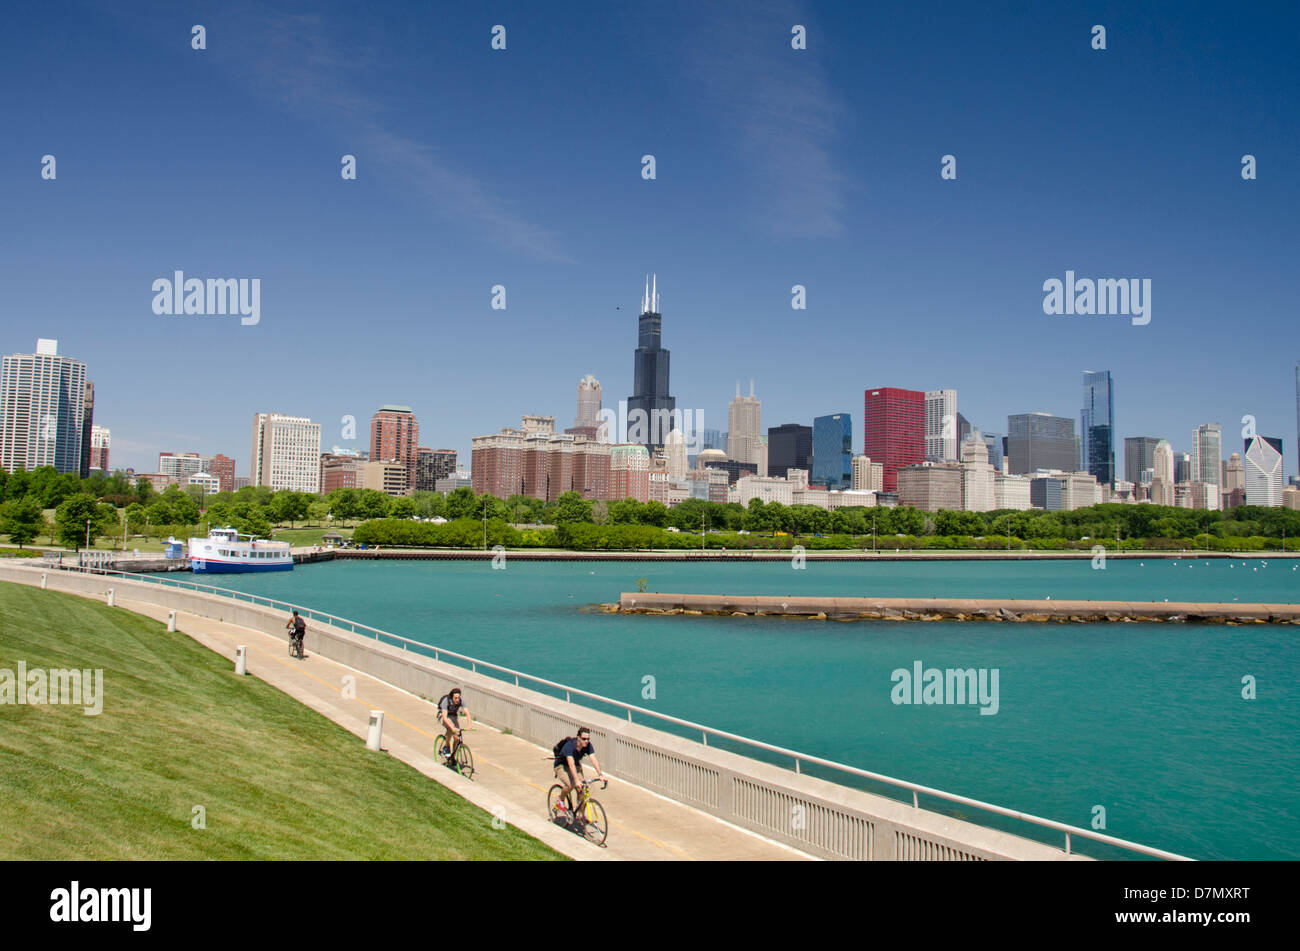 Illinois, Chicago. Downtown city skyline view of Chicago from Lake Michigan. Stock Photo